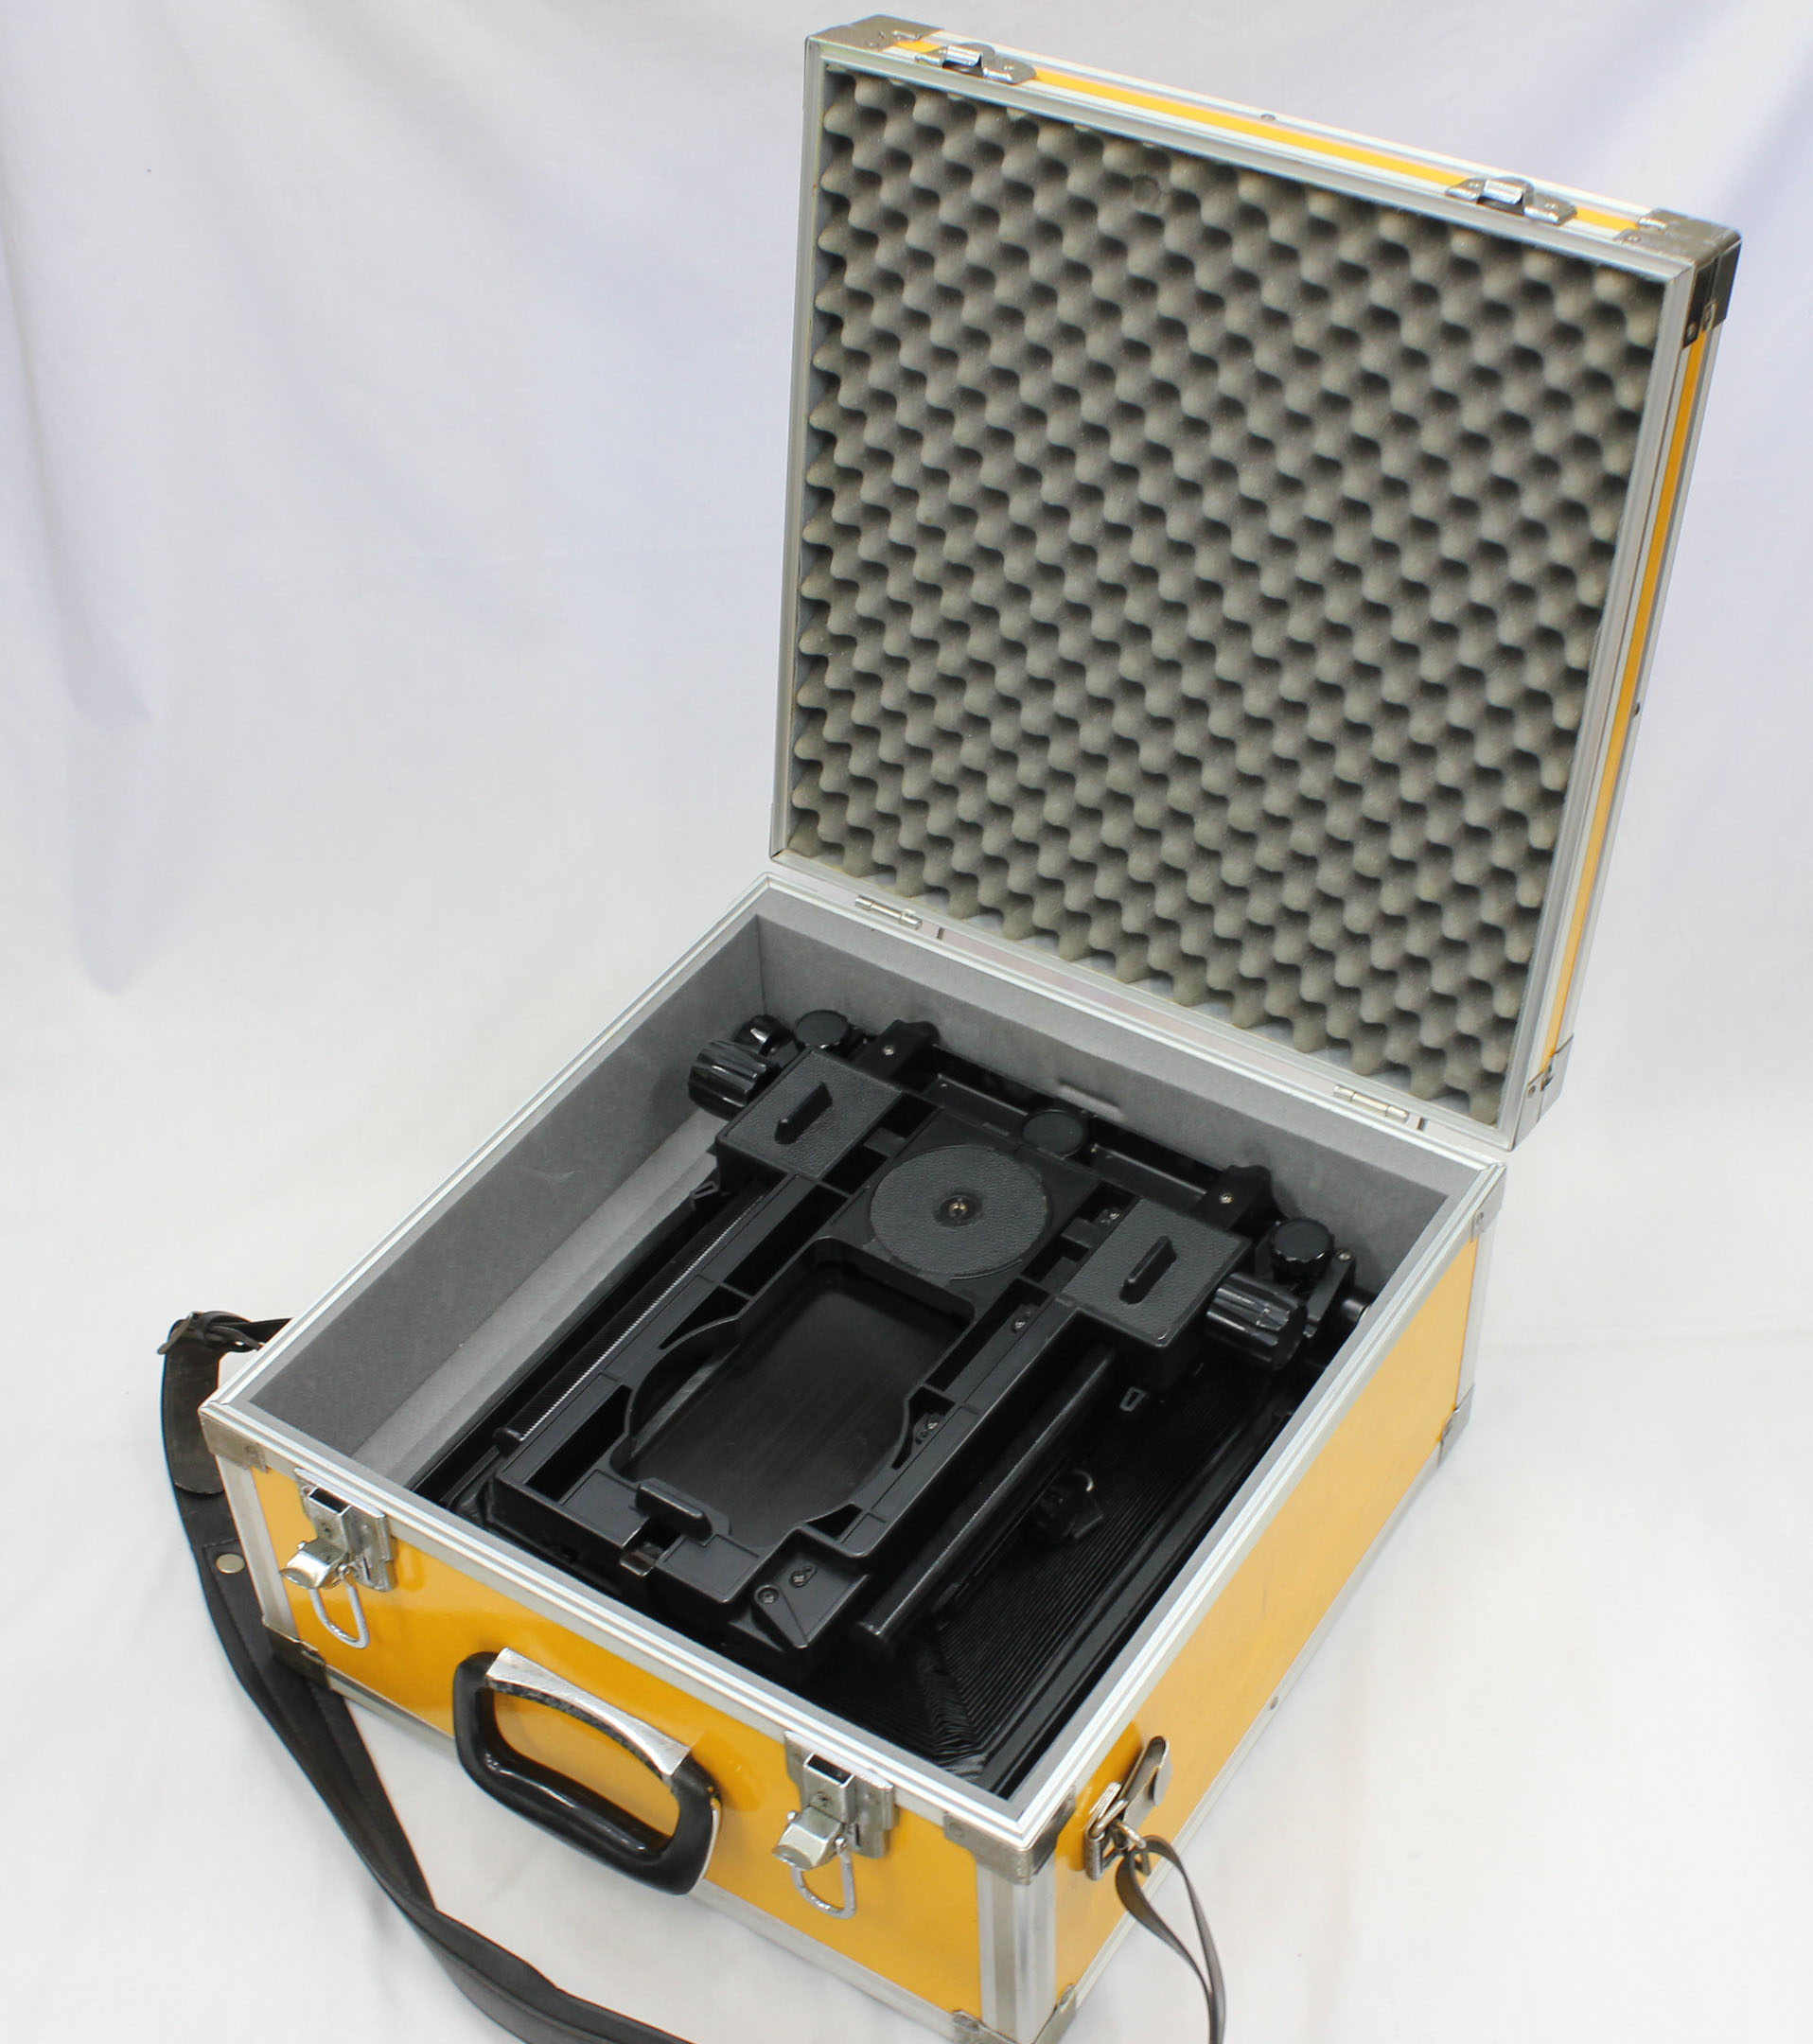 Toyo Field 810M II 8x10 Large Format Camera with Linhof Board Adapter in Toyo Case from Japan Photo 15